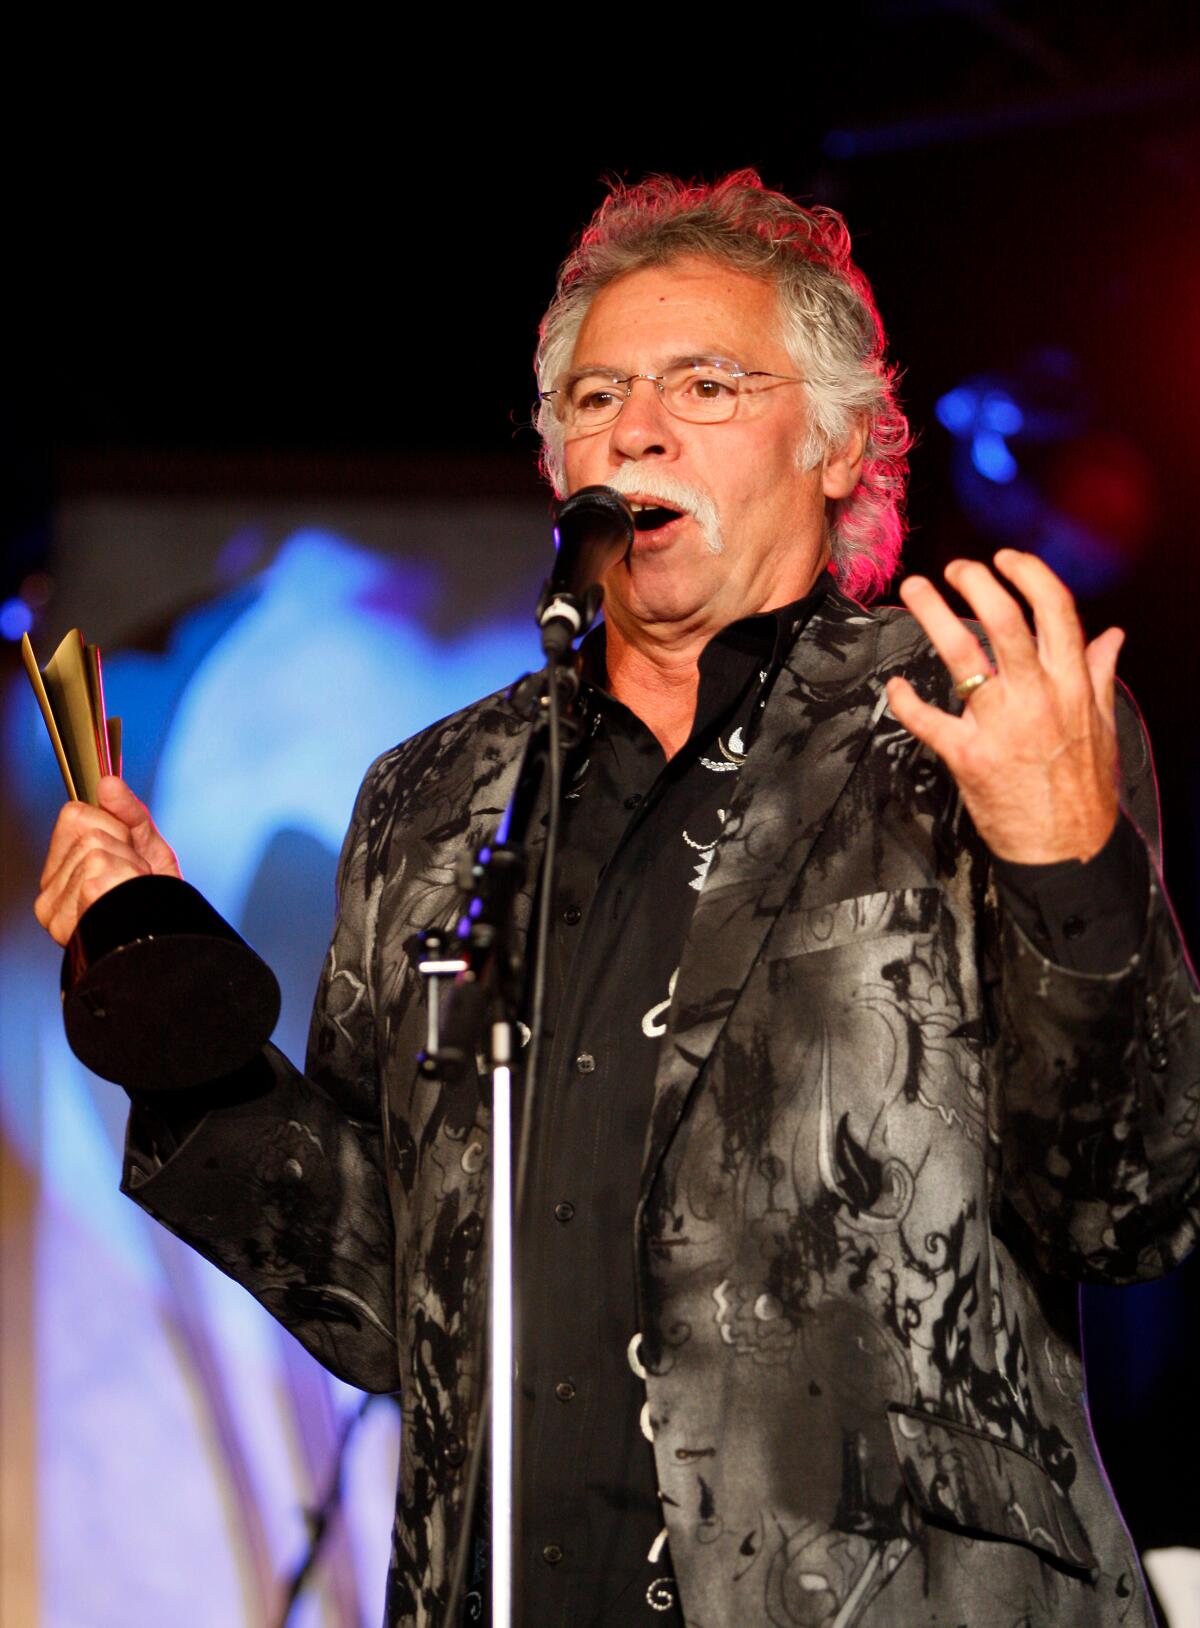 Joe Bonsall holds a gold and black trophy and talks into a mic while wearing a black suit jacket with floral designs